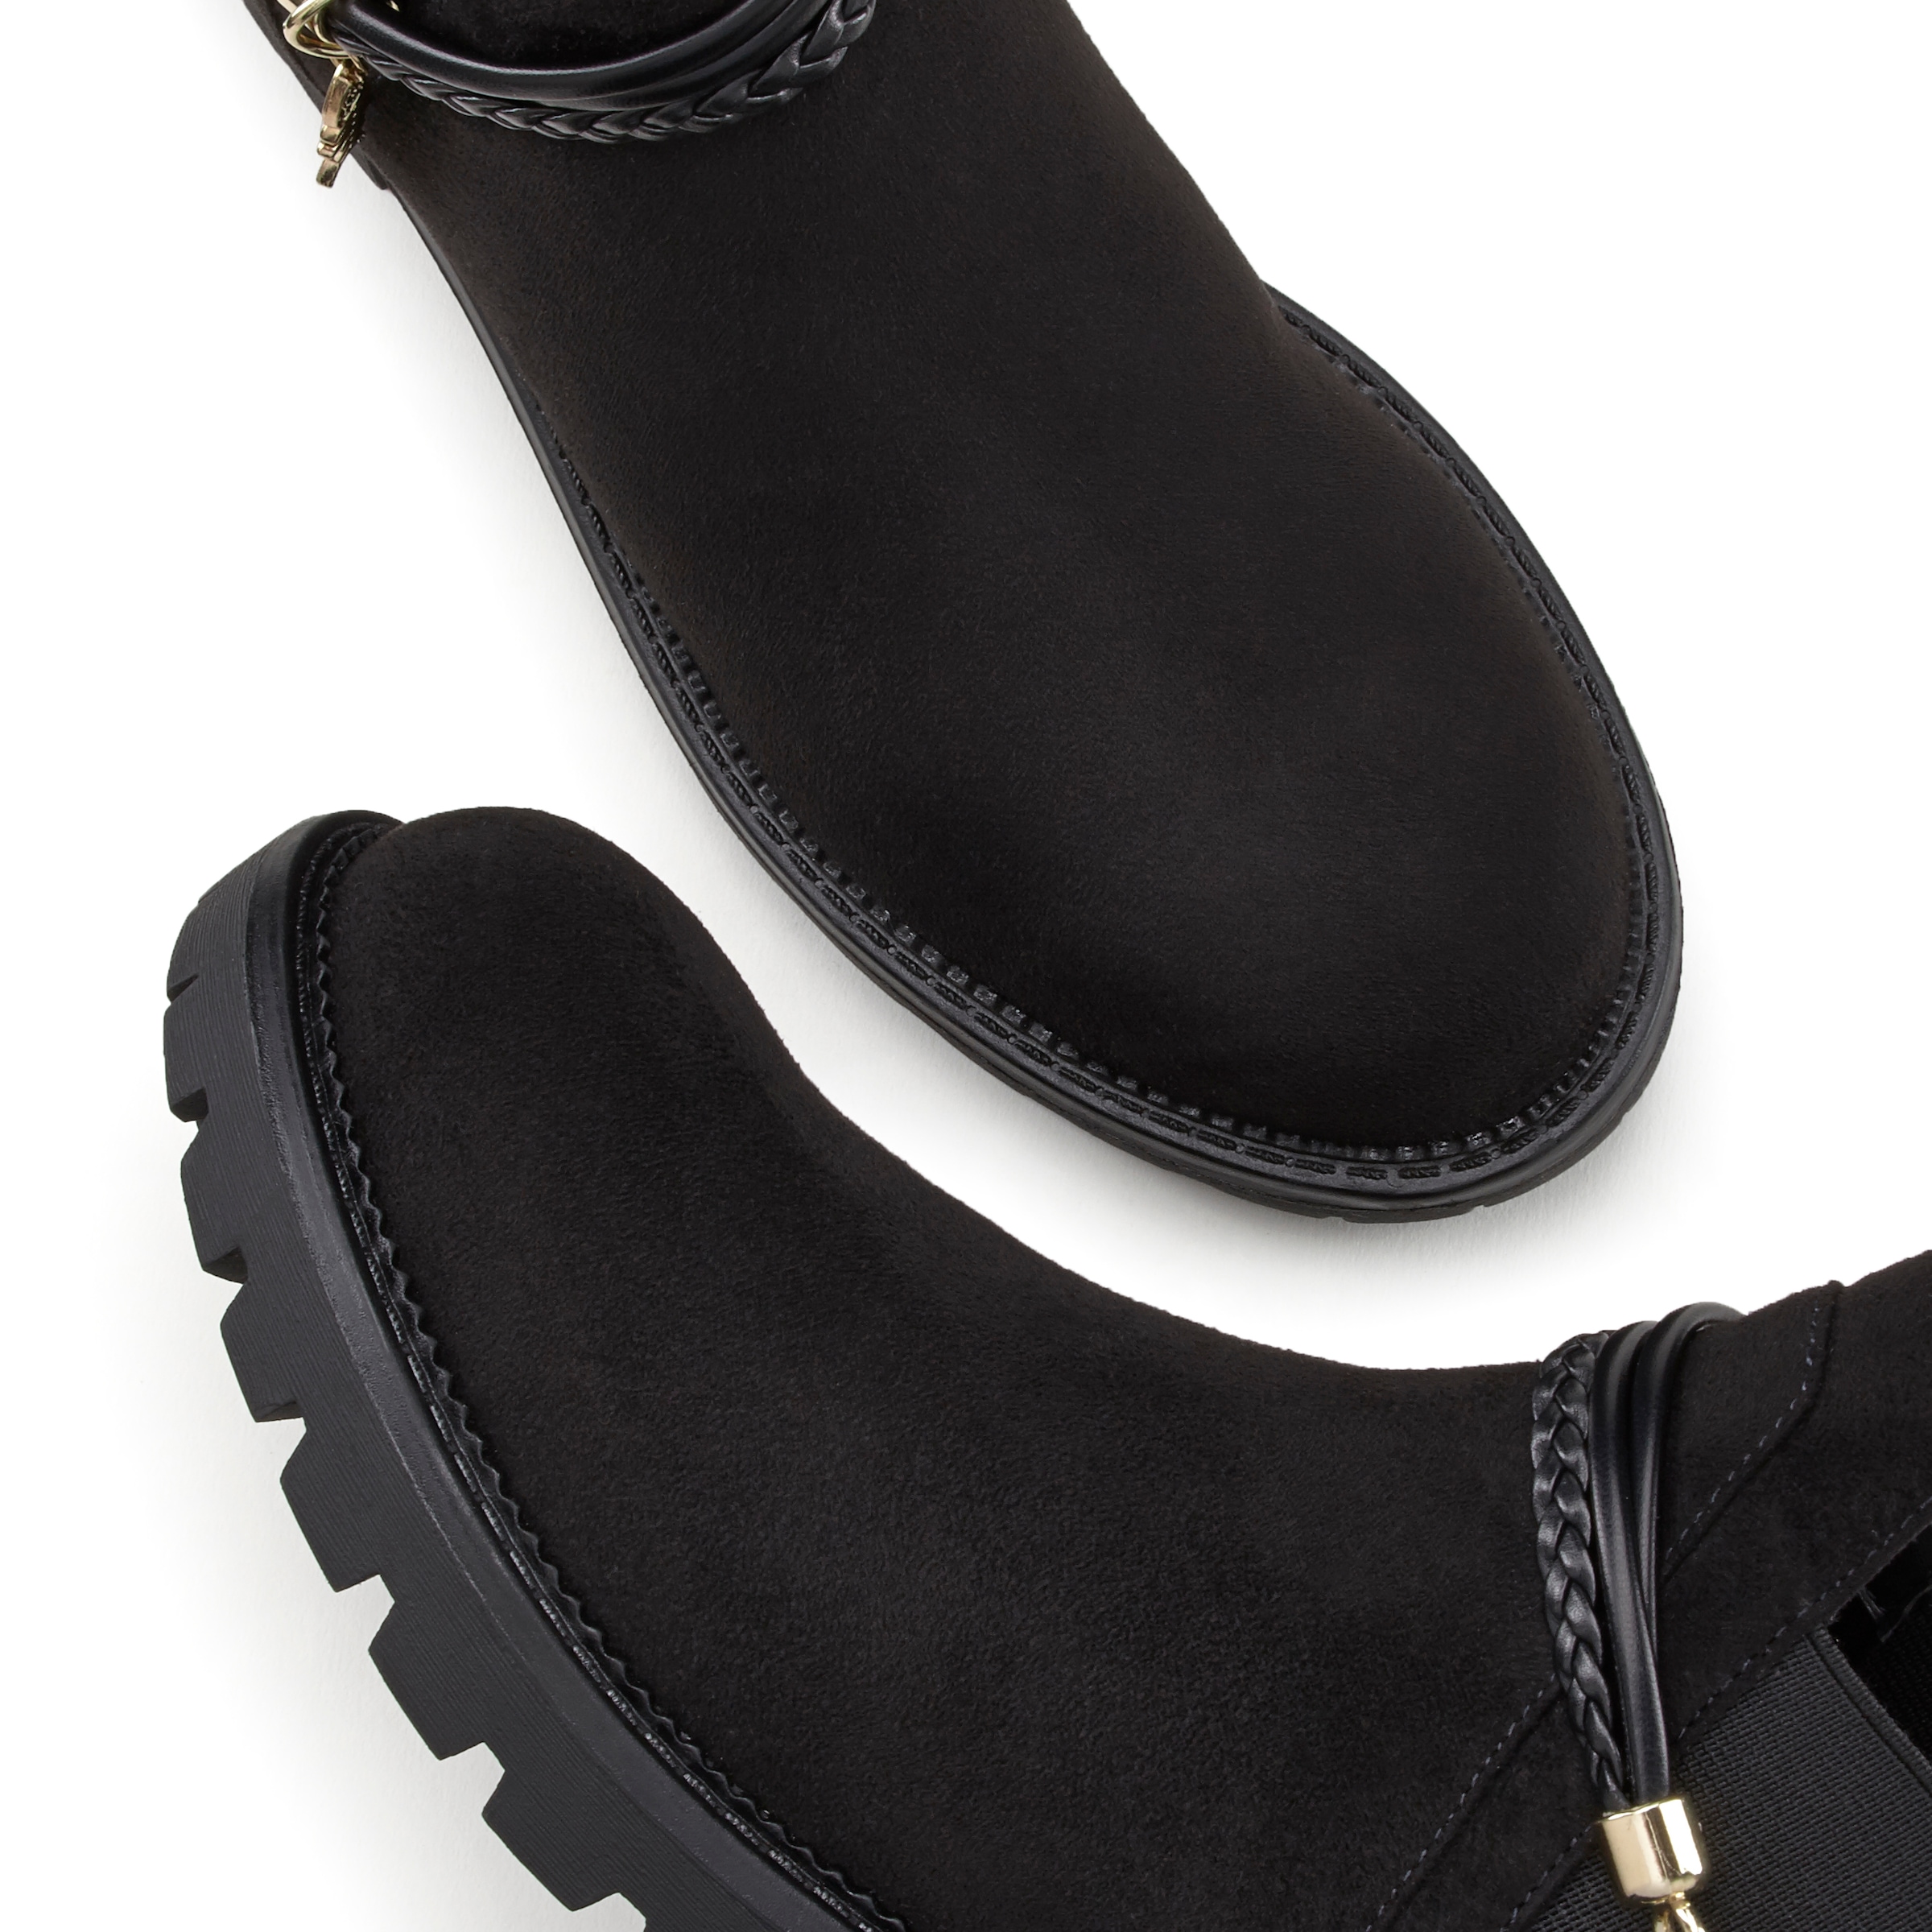 LASCANA Chelseaboots, mit abnehmbarem Band und Chunky-Sohle, Ankle Boots, Stiefelette